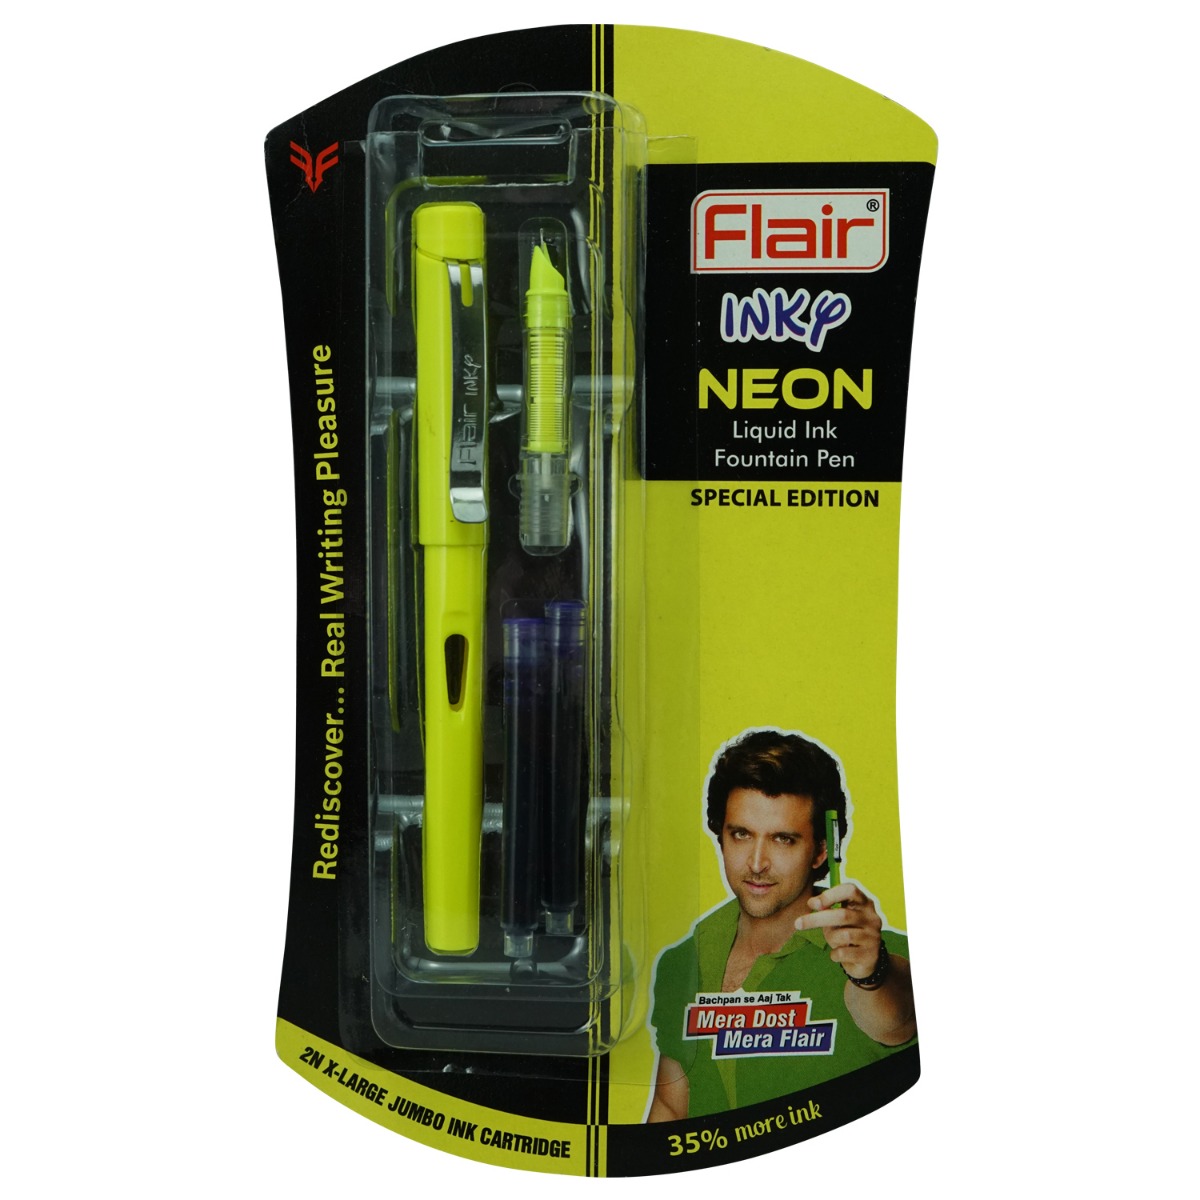 Flair Inky Neon Model:16172 Sulfur Yellow Color Body  With 2 Catridge Fine Tip Fountain Pen